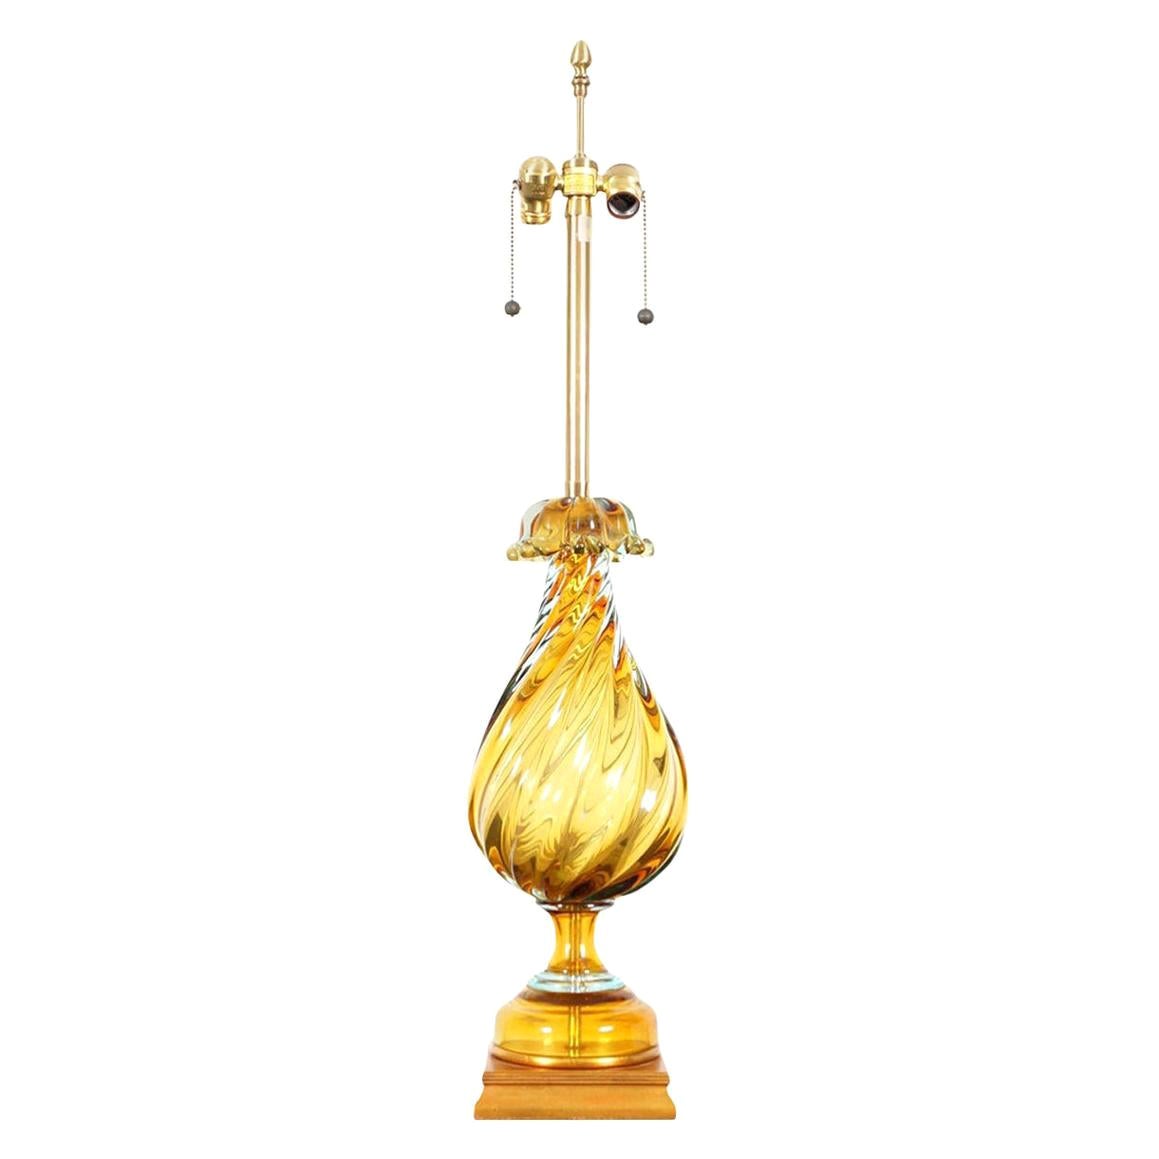 Vintage Murano Glass "Sommerso" Lamp by Seguso